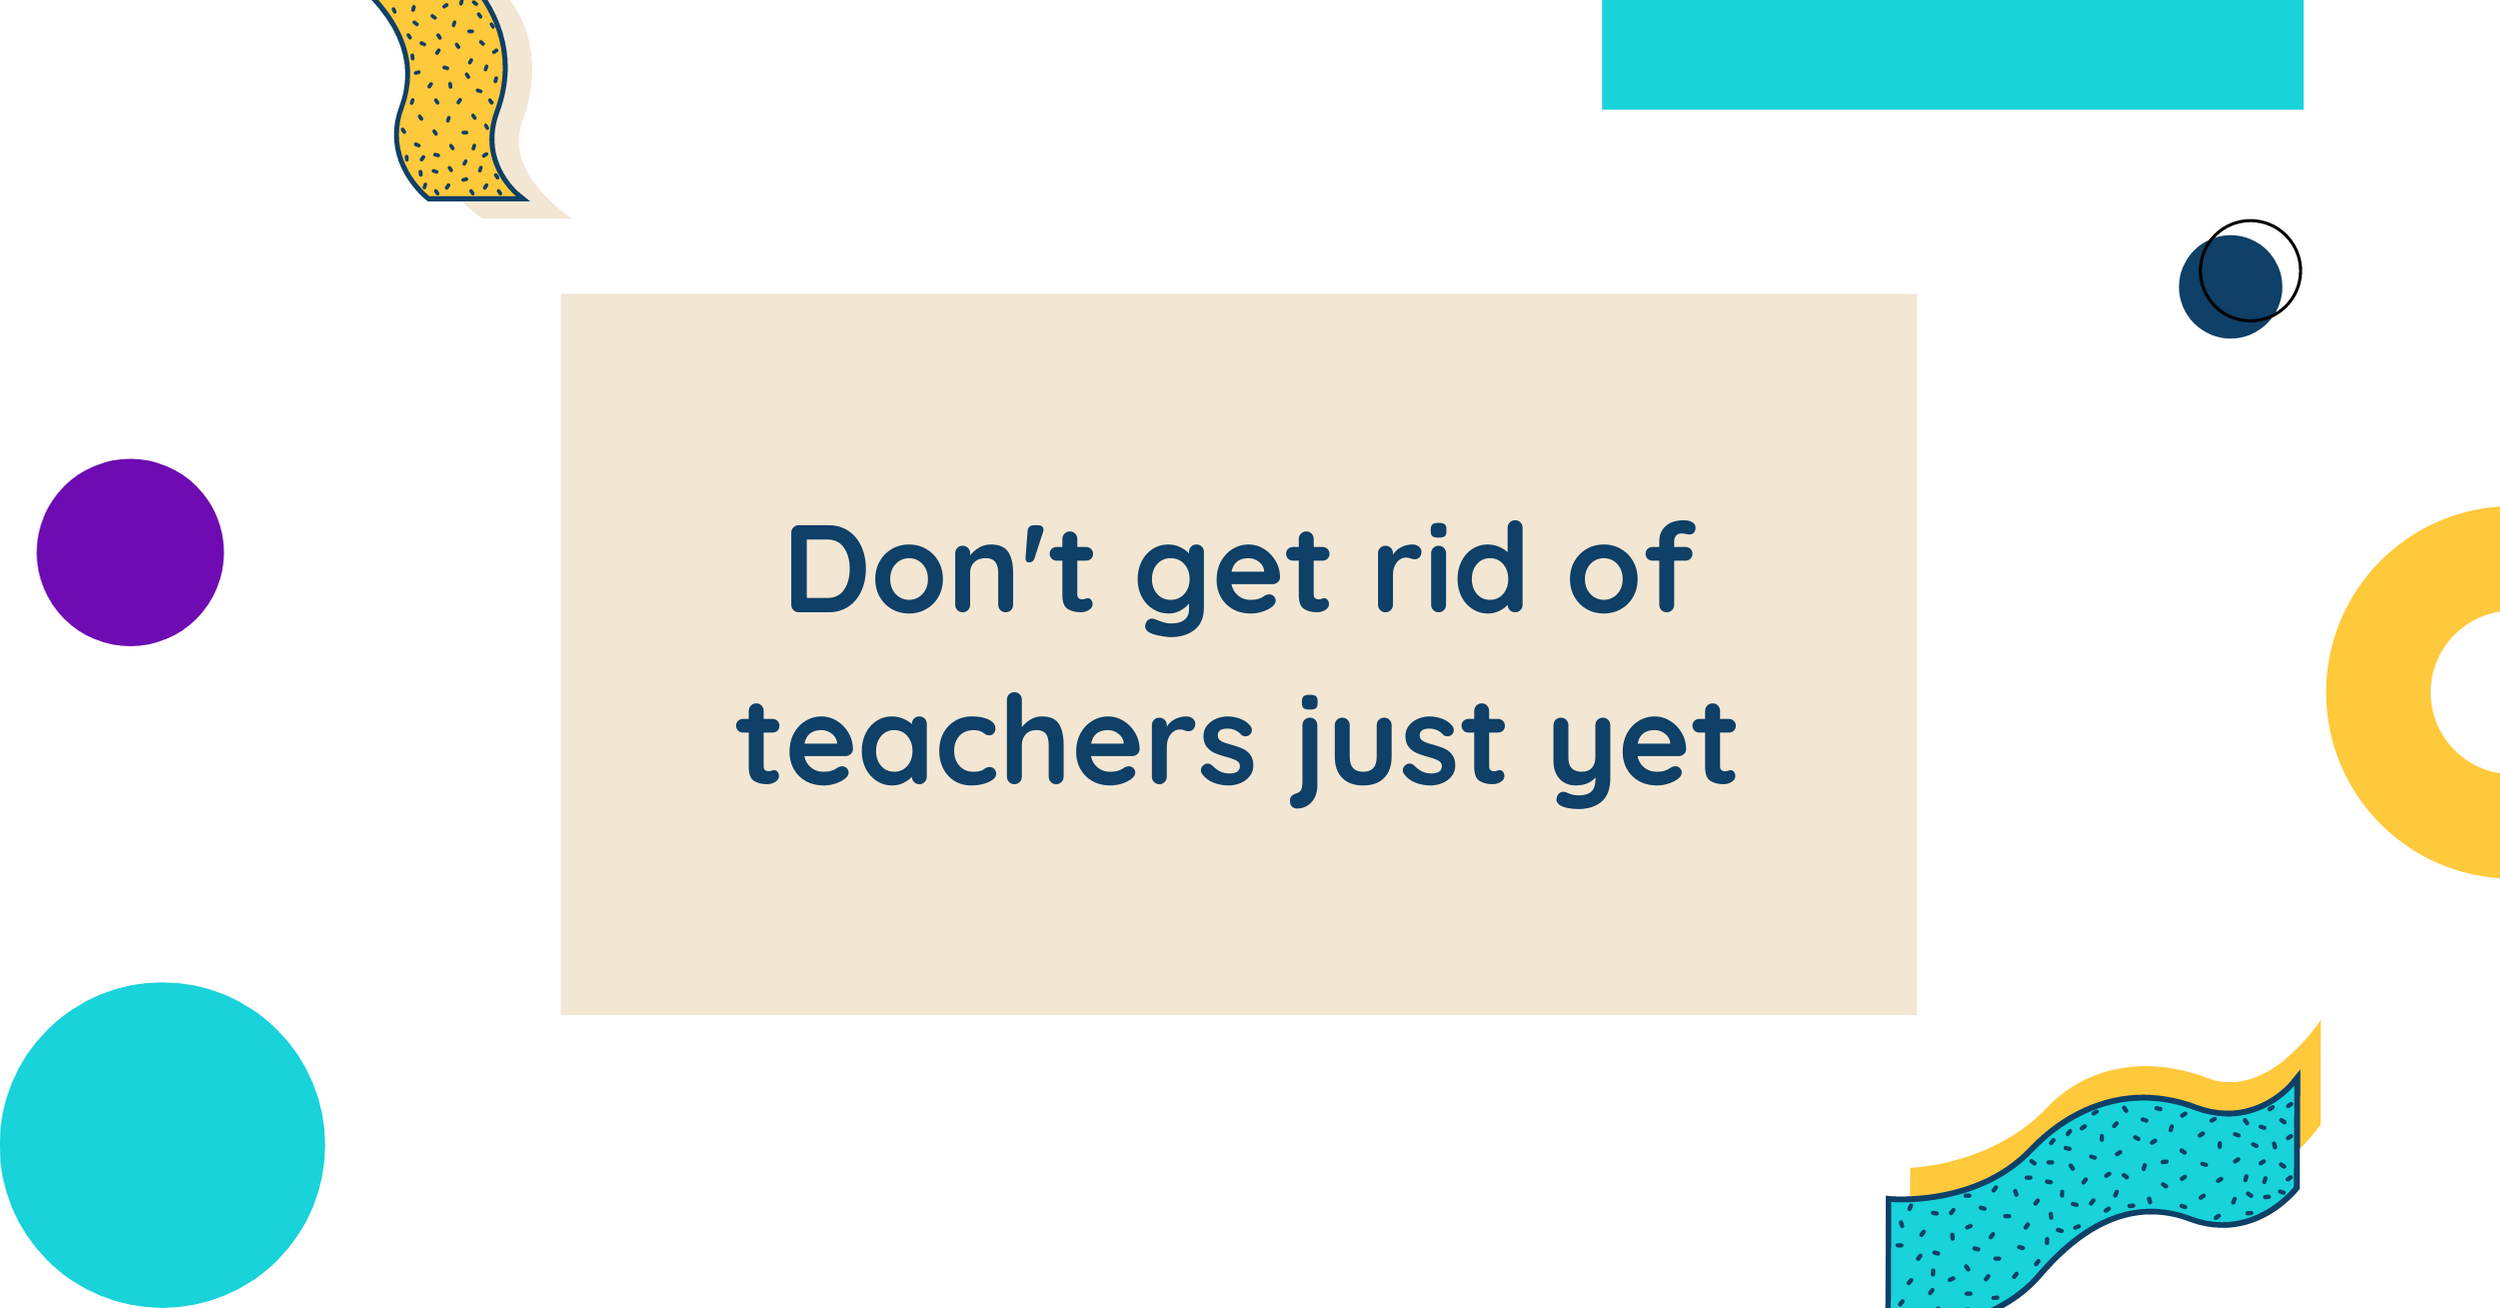 Don't get rid of teachers just yet